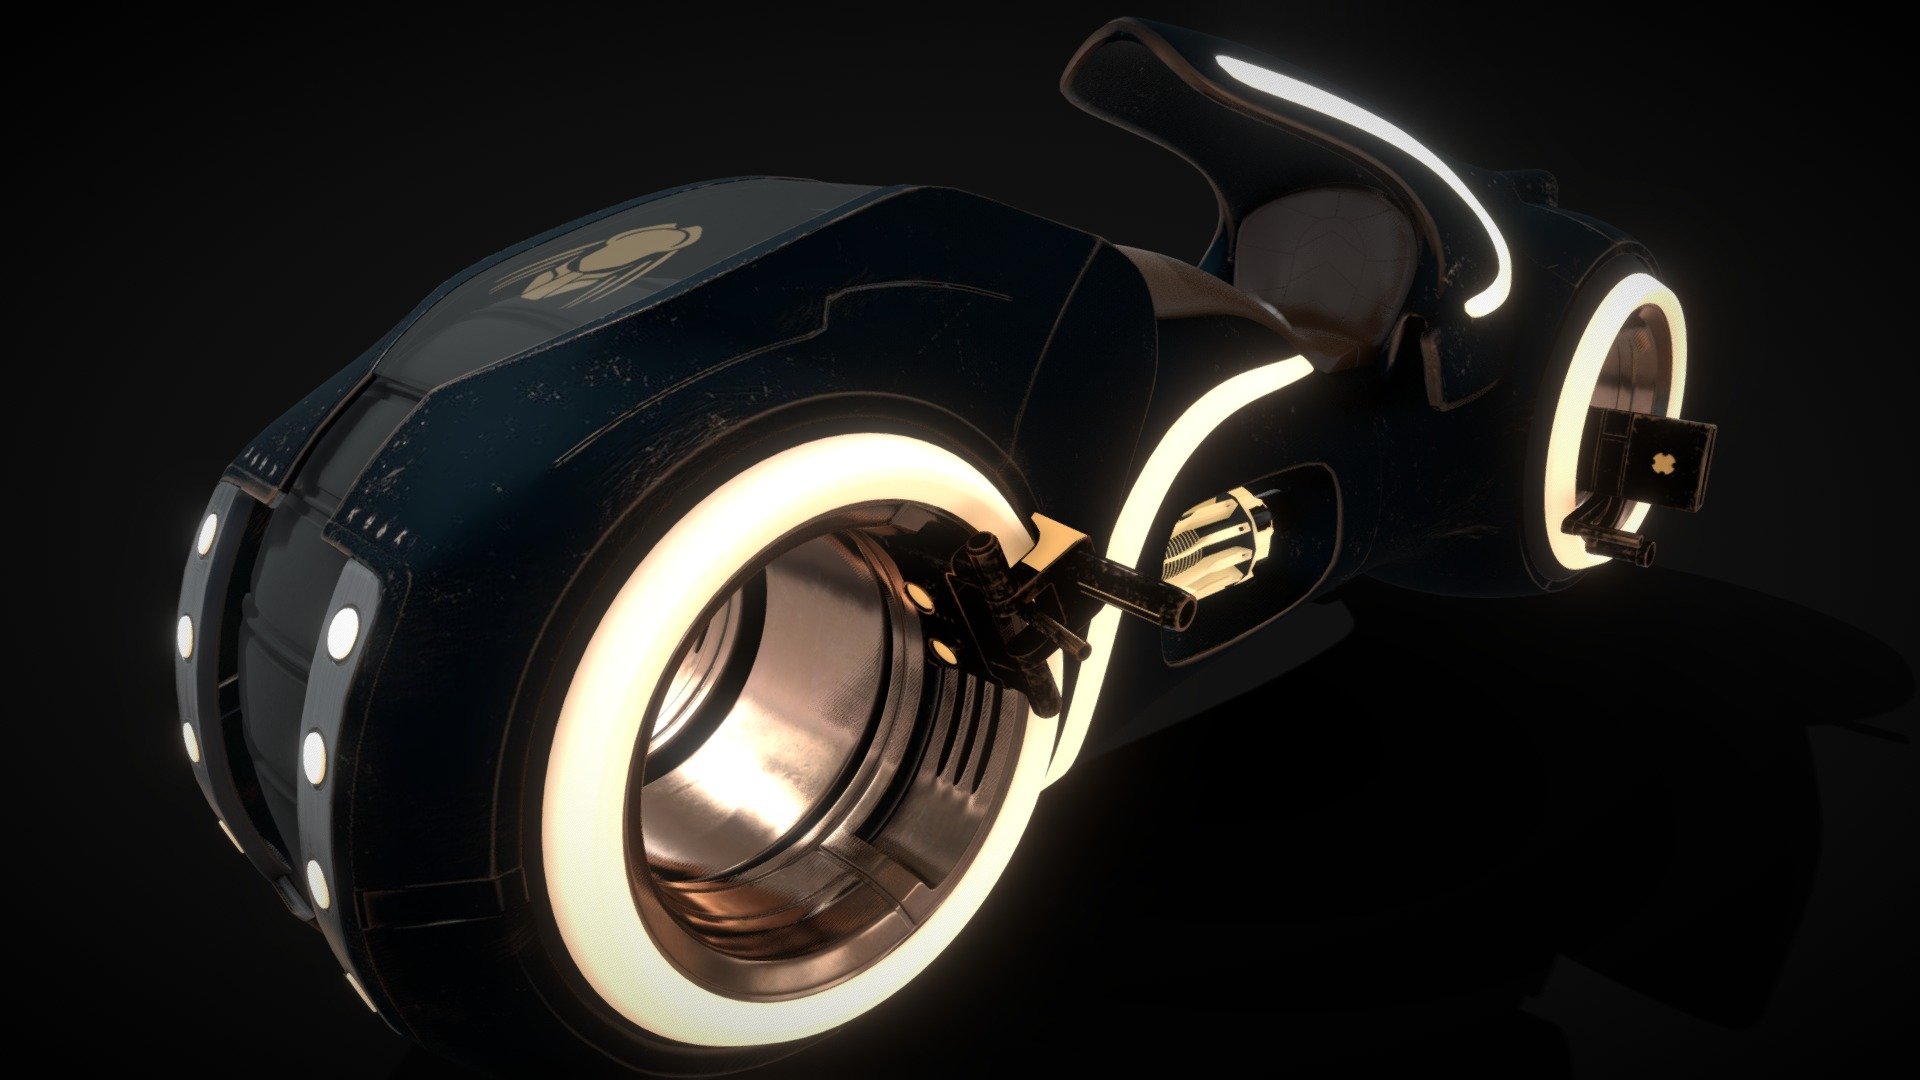 Tron light cycle is modelled in maya textured in substance painter - Tron Light Cycle - 3D model by Manohar (@manohar.creed) 3d model